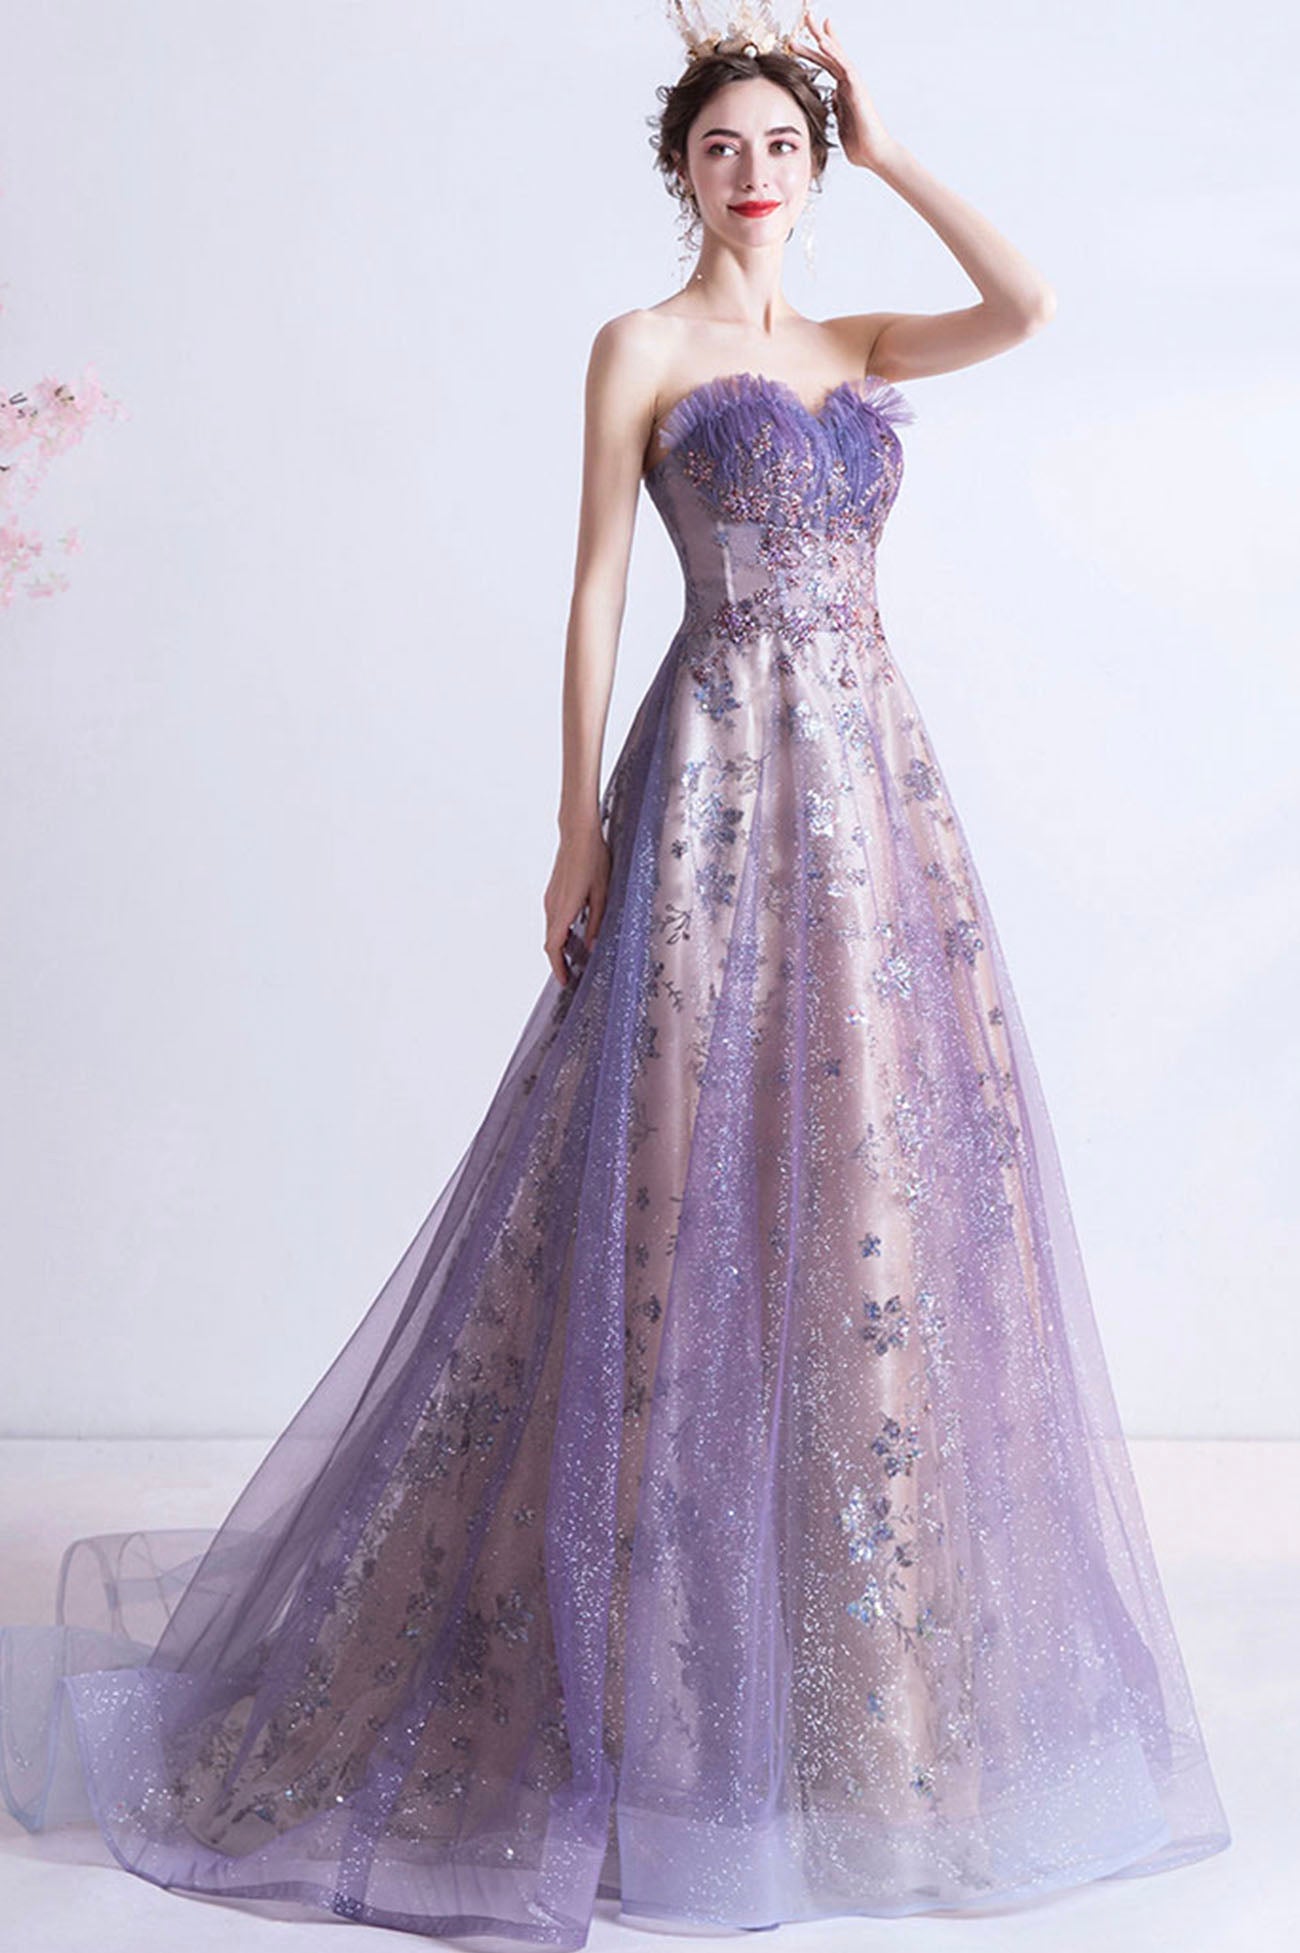 Eightree Sparkle Purple Tulle Evening Dresses Long A Line Sequined